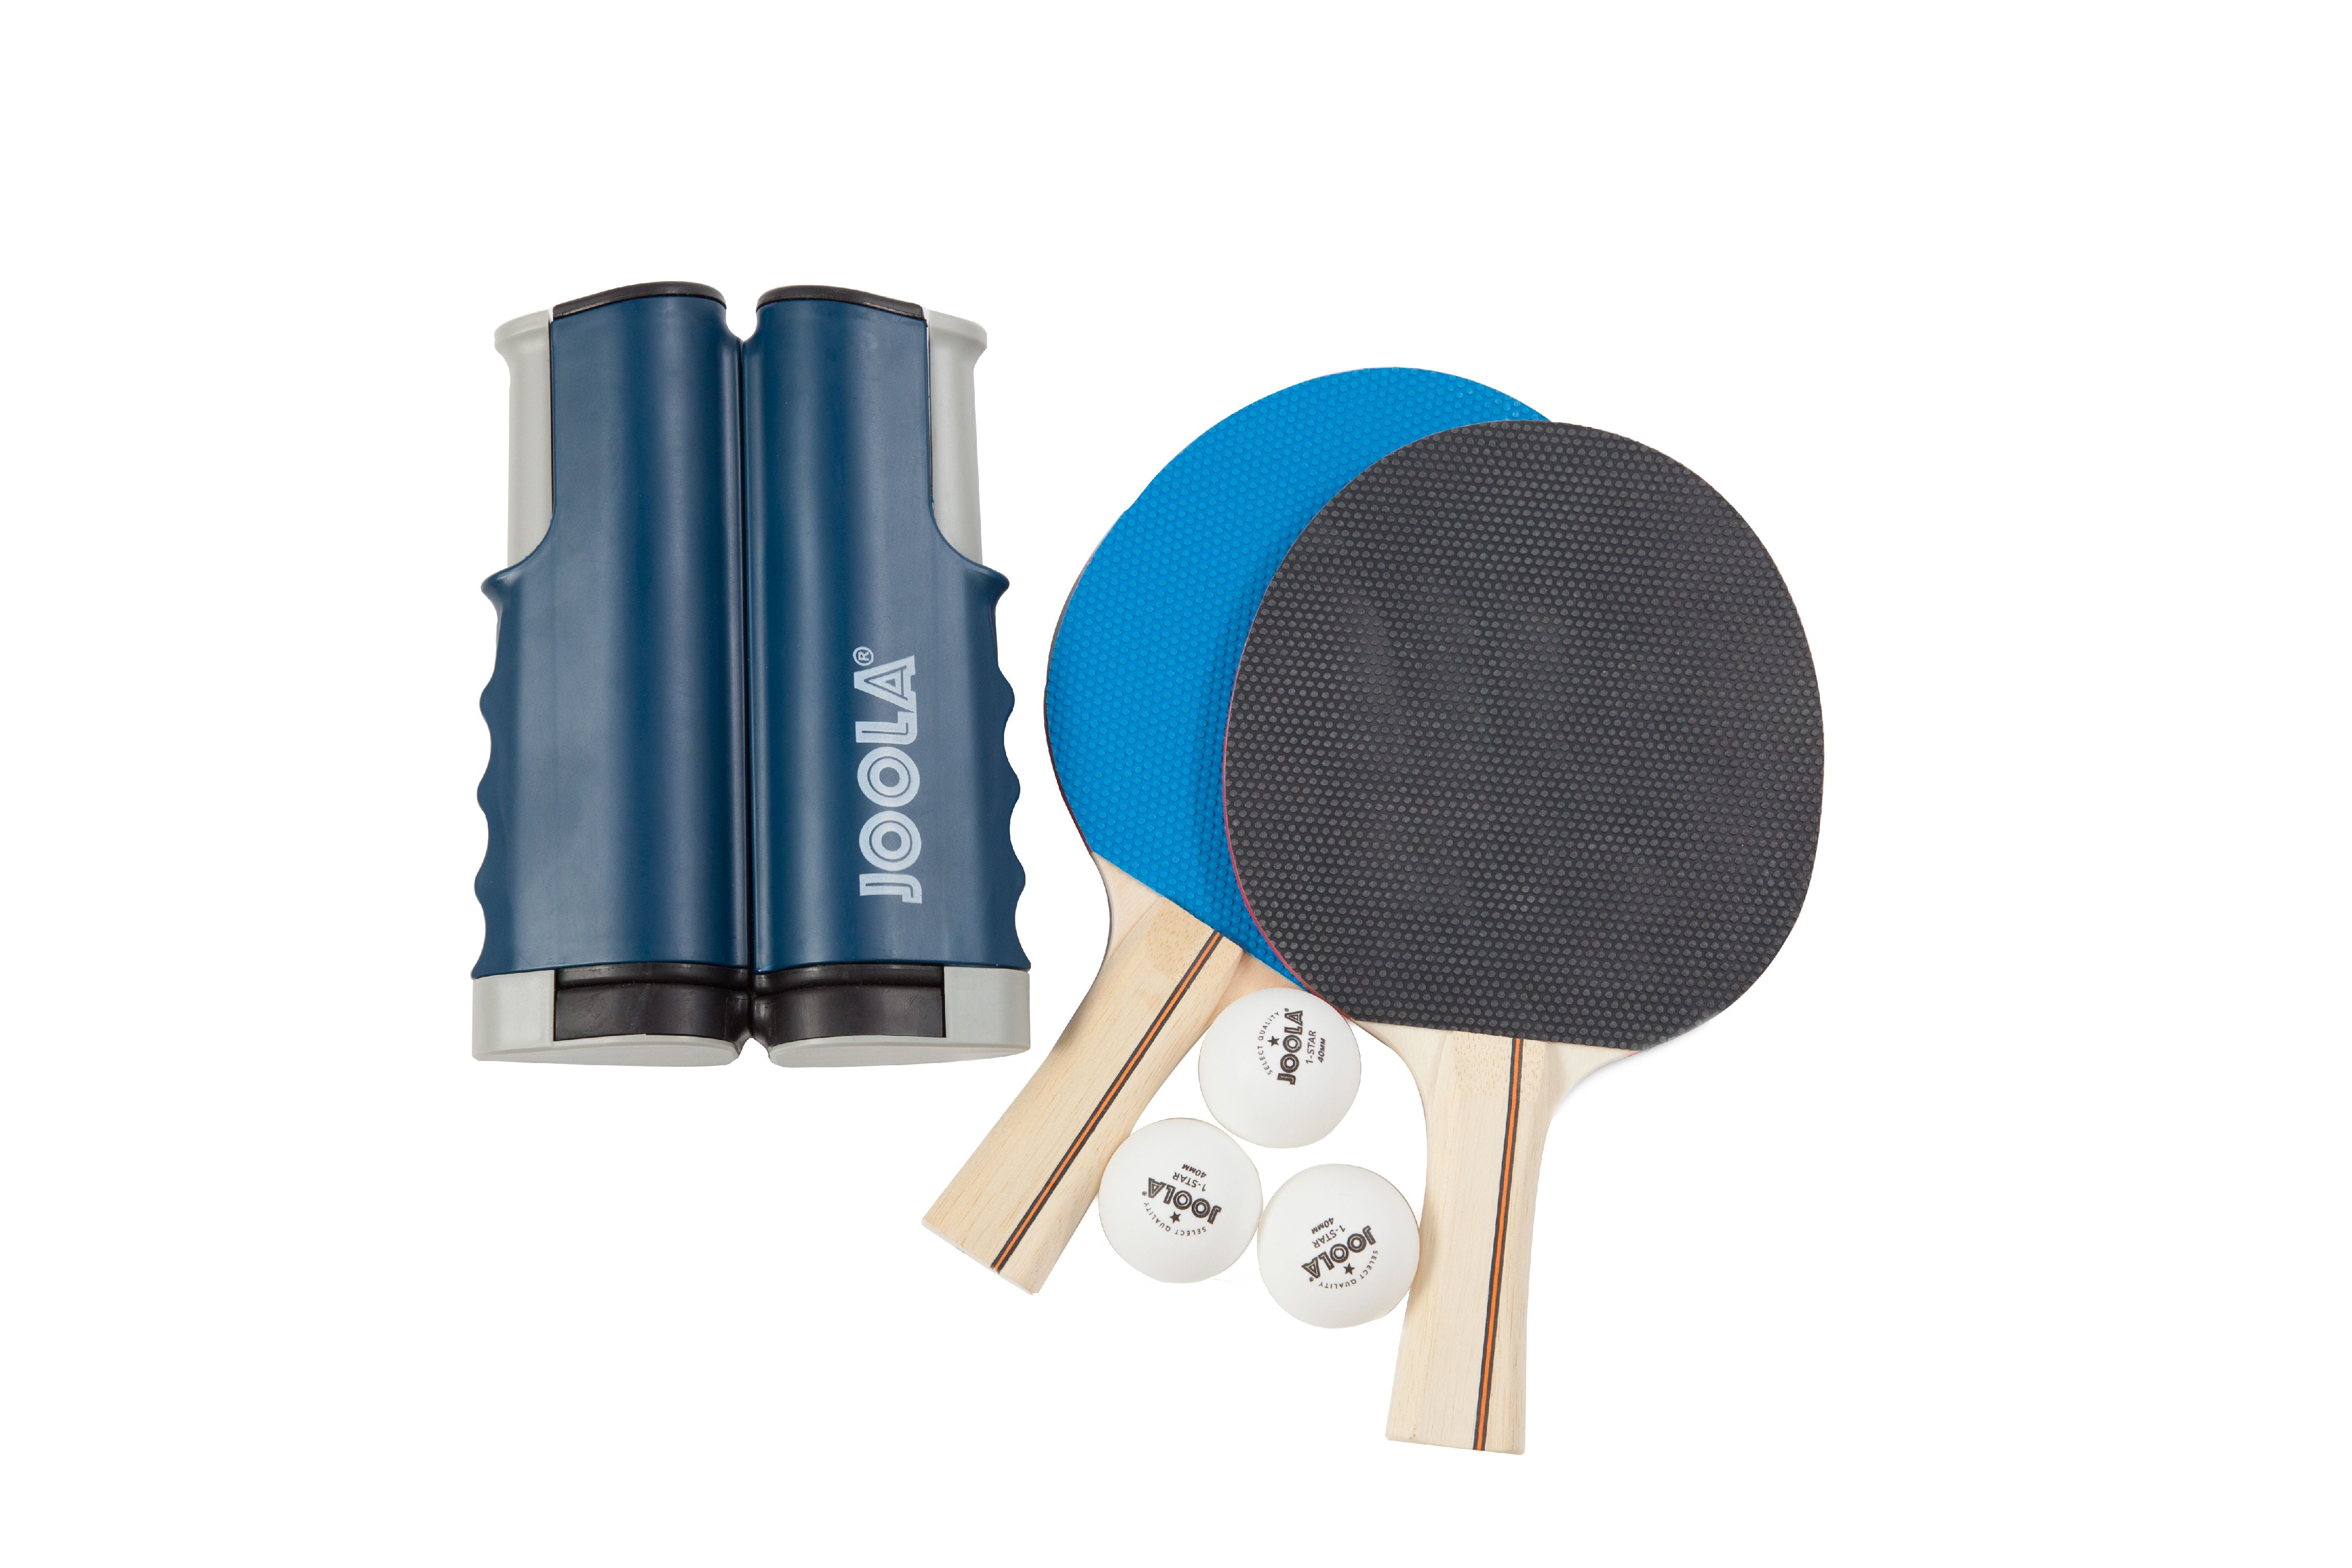 2 Ping Pong Paddles/Rackets All-in-ONE Ping Pong Set 3-Star White Ping Pong Balls Portable Table Tennis Set with Retractable Net Includes Ping Pong Net for Any Table Premium Storage Case 